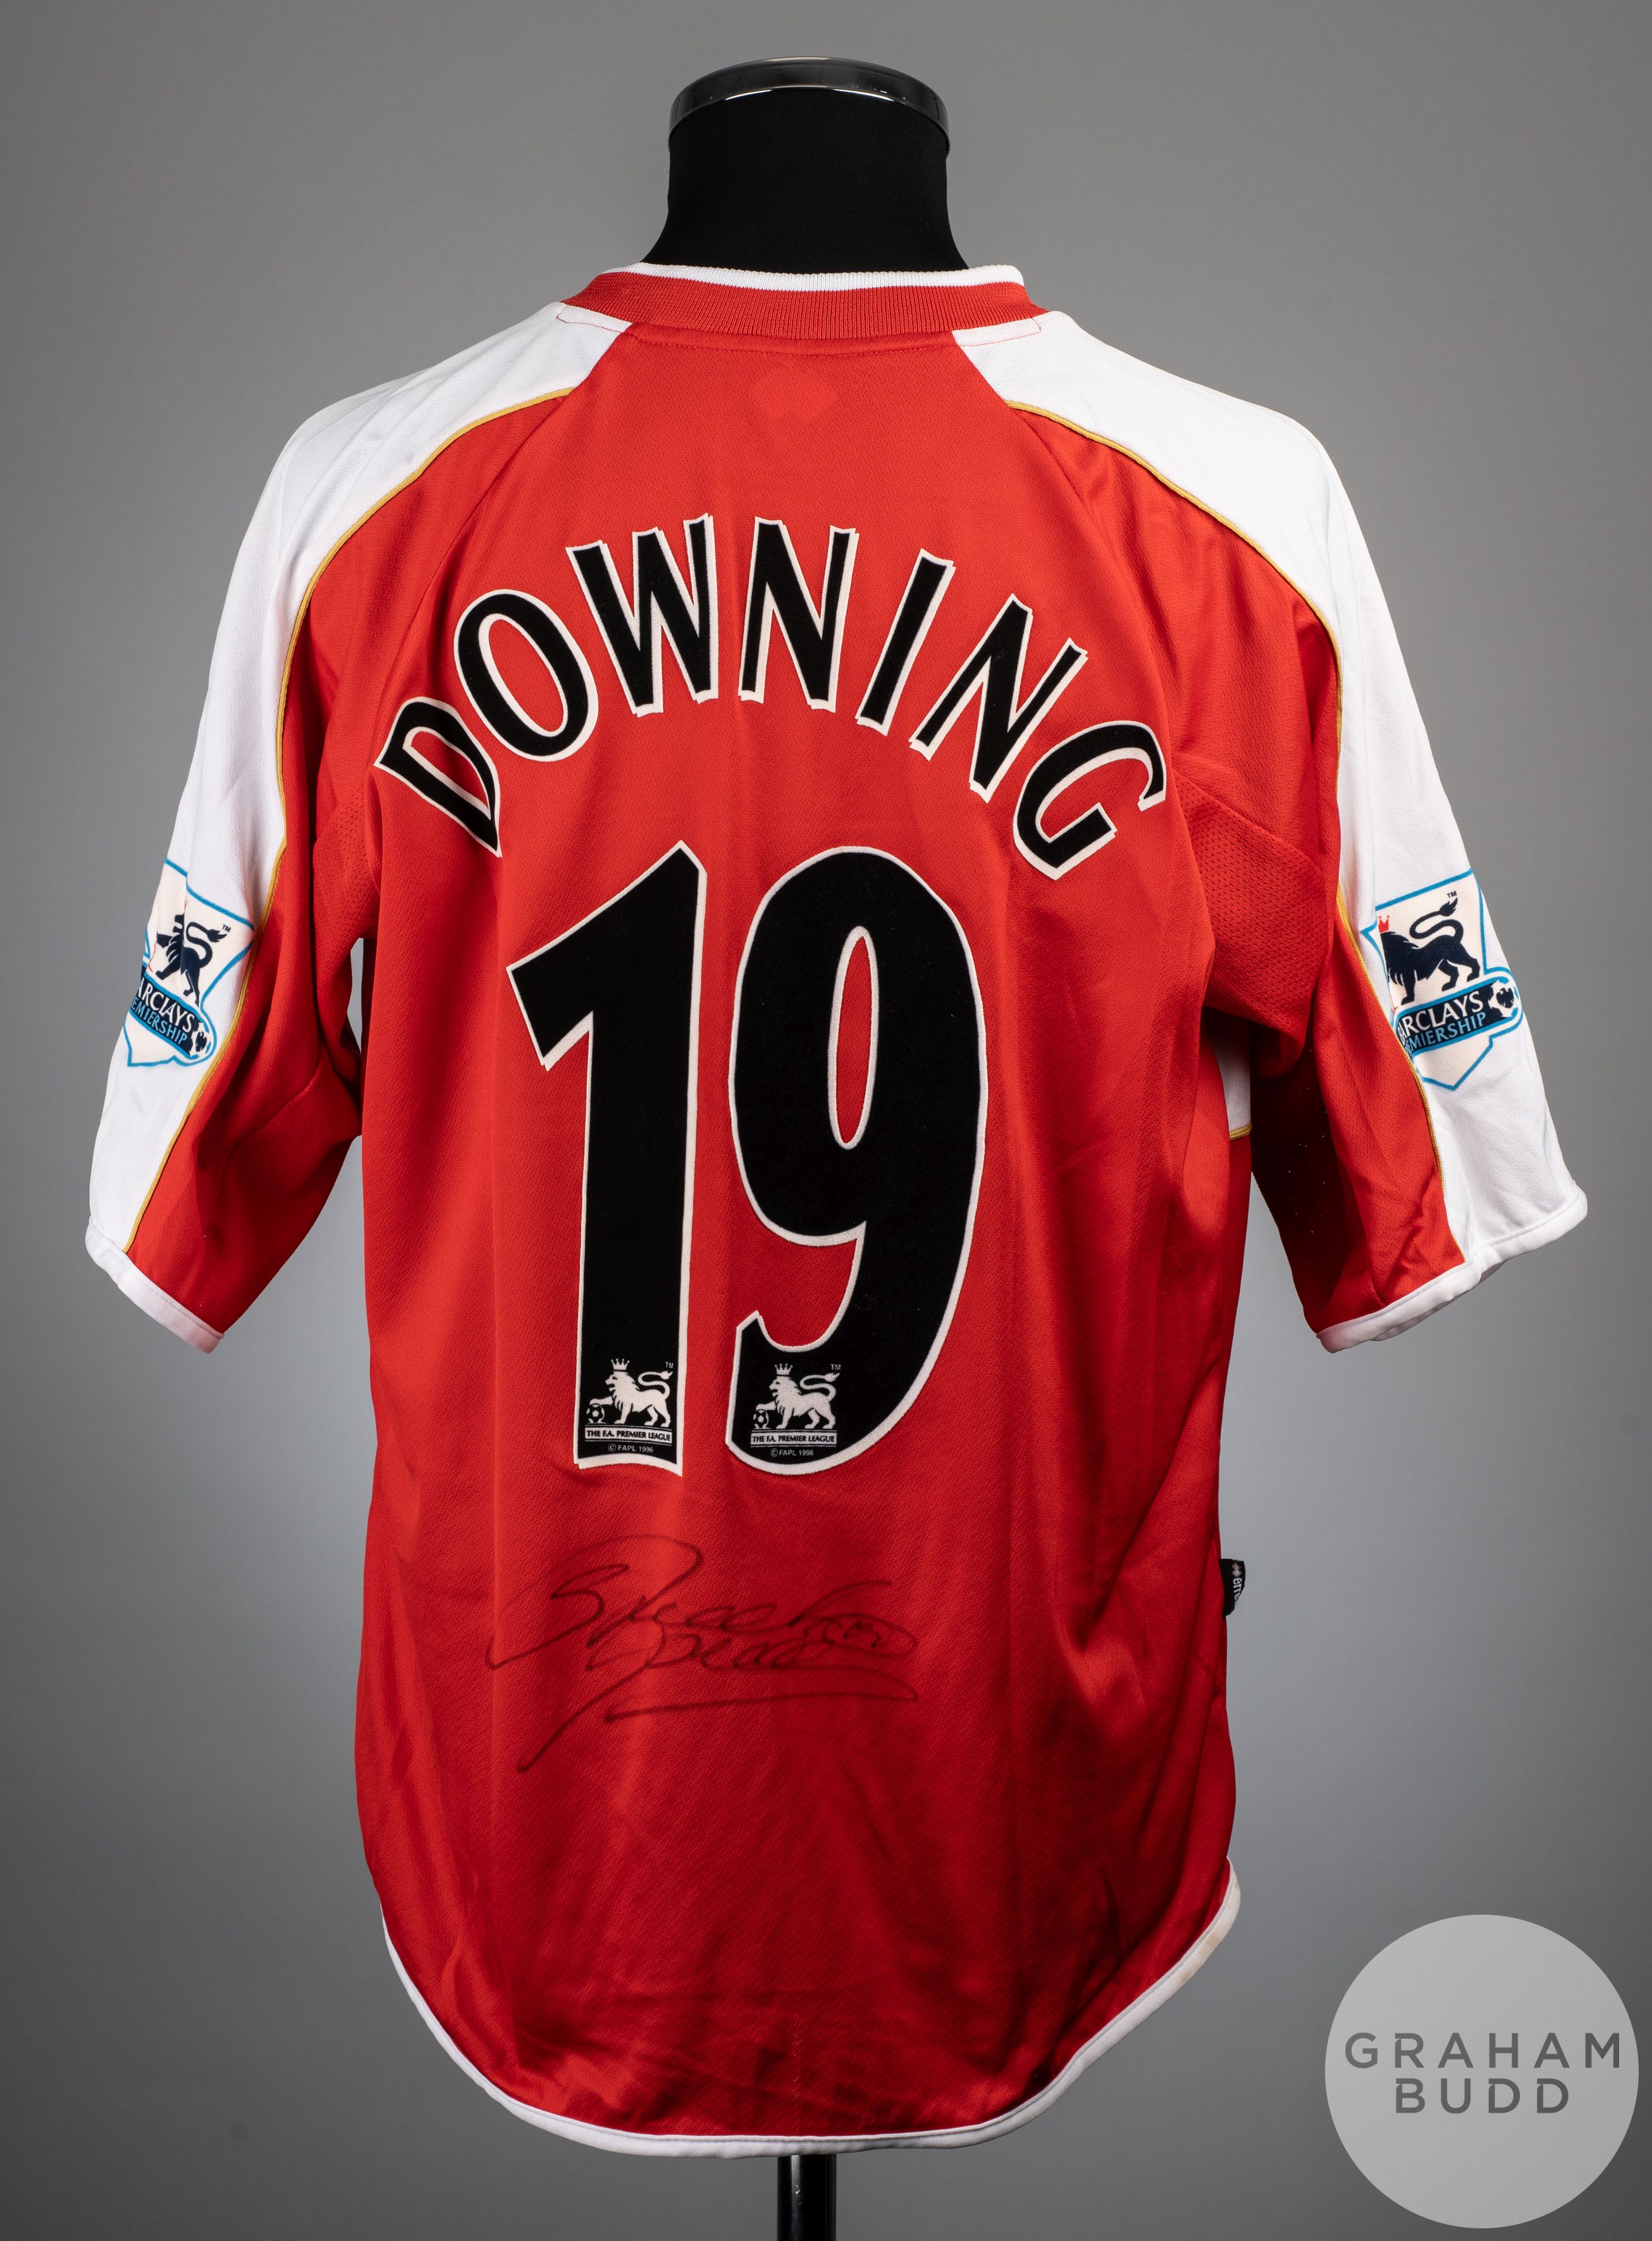 Stewart Downing signed red and white No.19 Middlesbrough match worn long-sleeved shirt, 2006-07 - Image 2 of 2